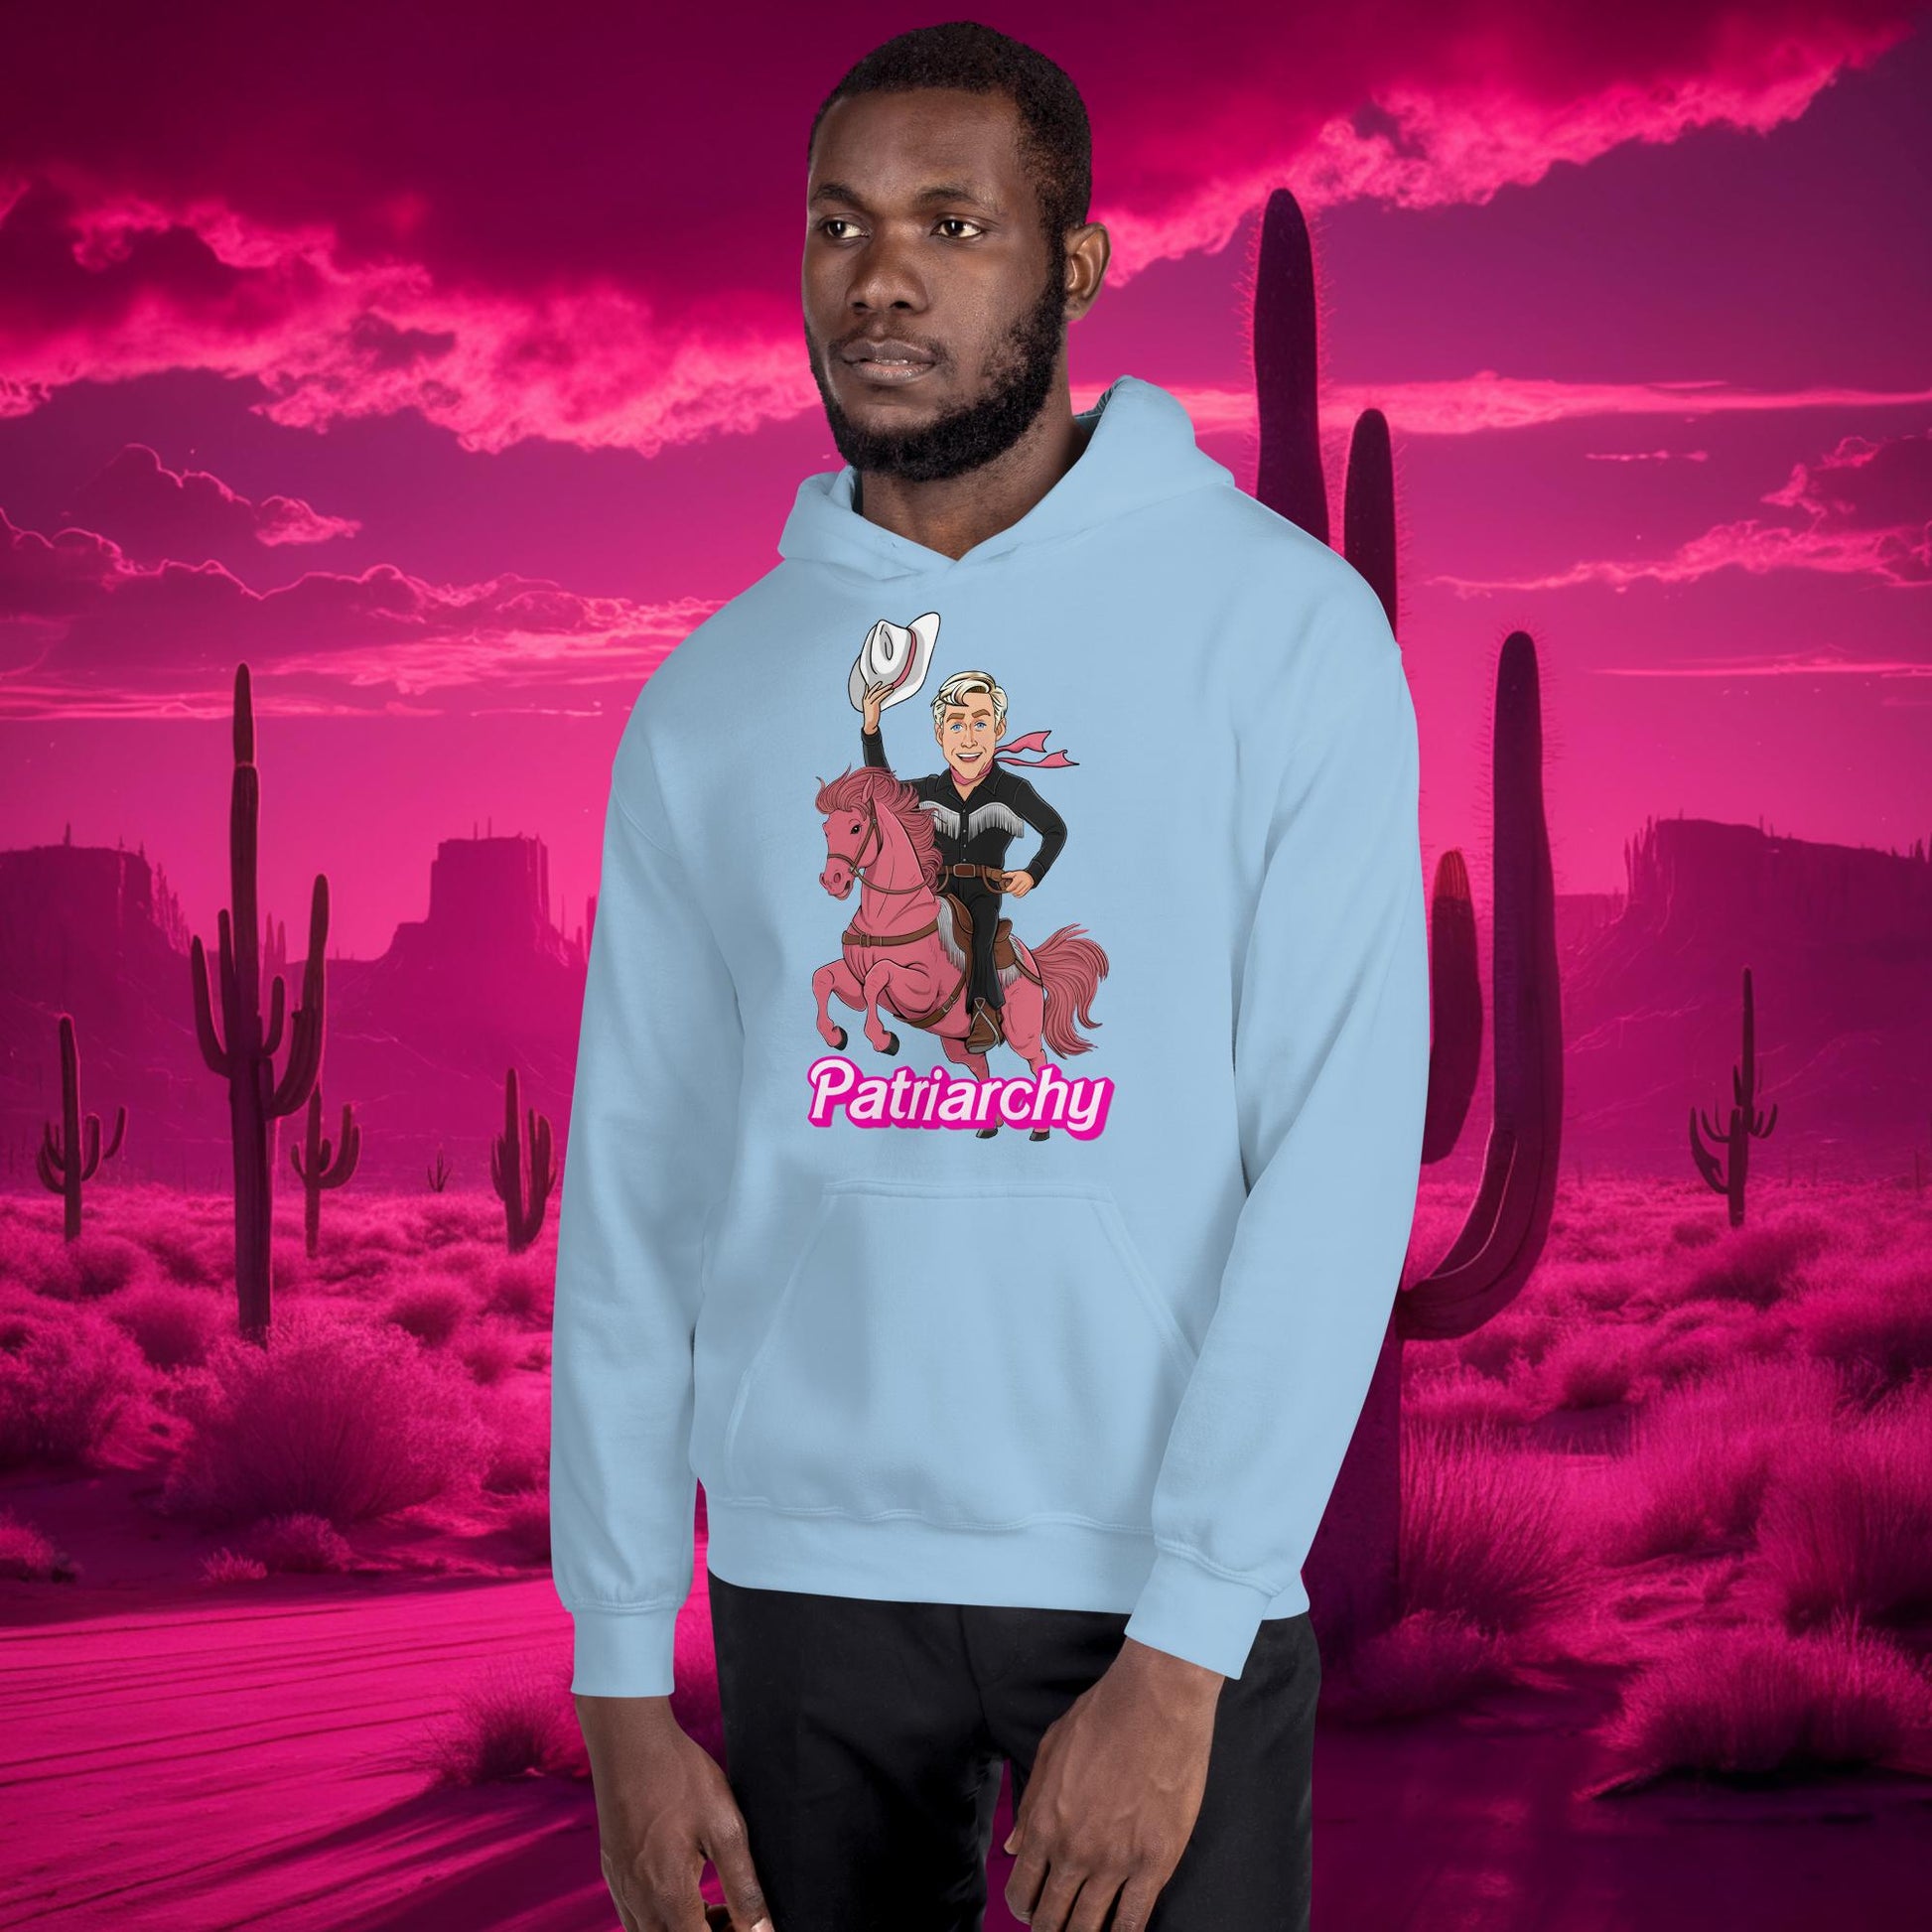 Ken Barbie Movie When I found out the patriarchy wasn't just about horses, I lost interest Unisex Hoodie Next Cult Brand